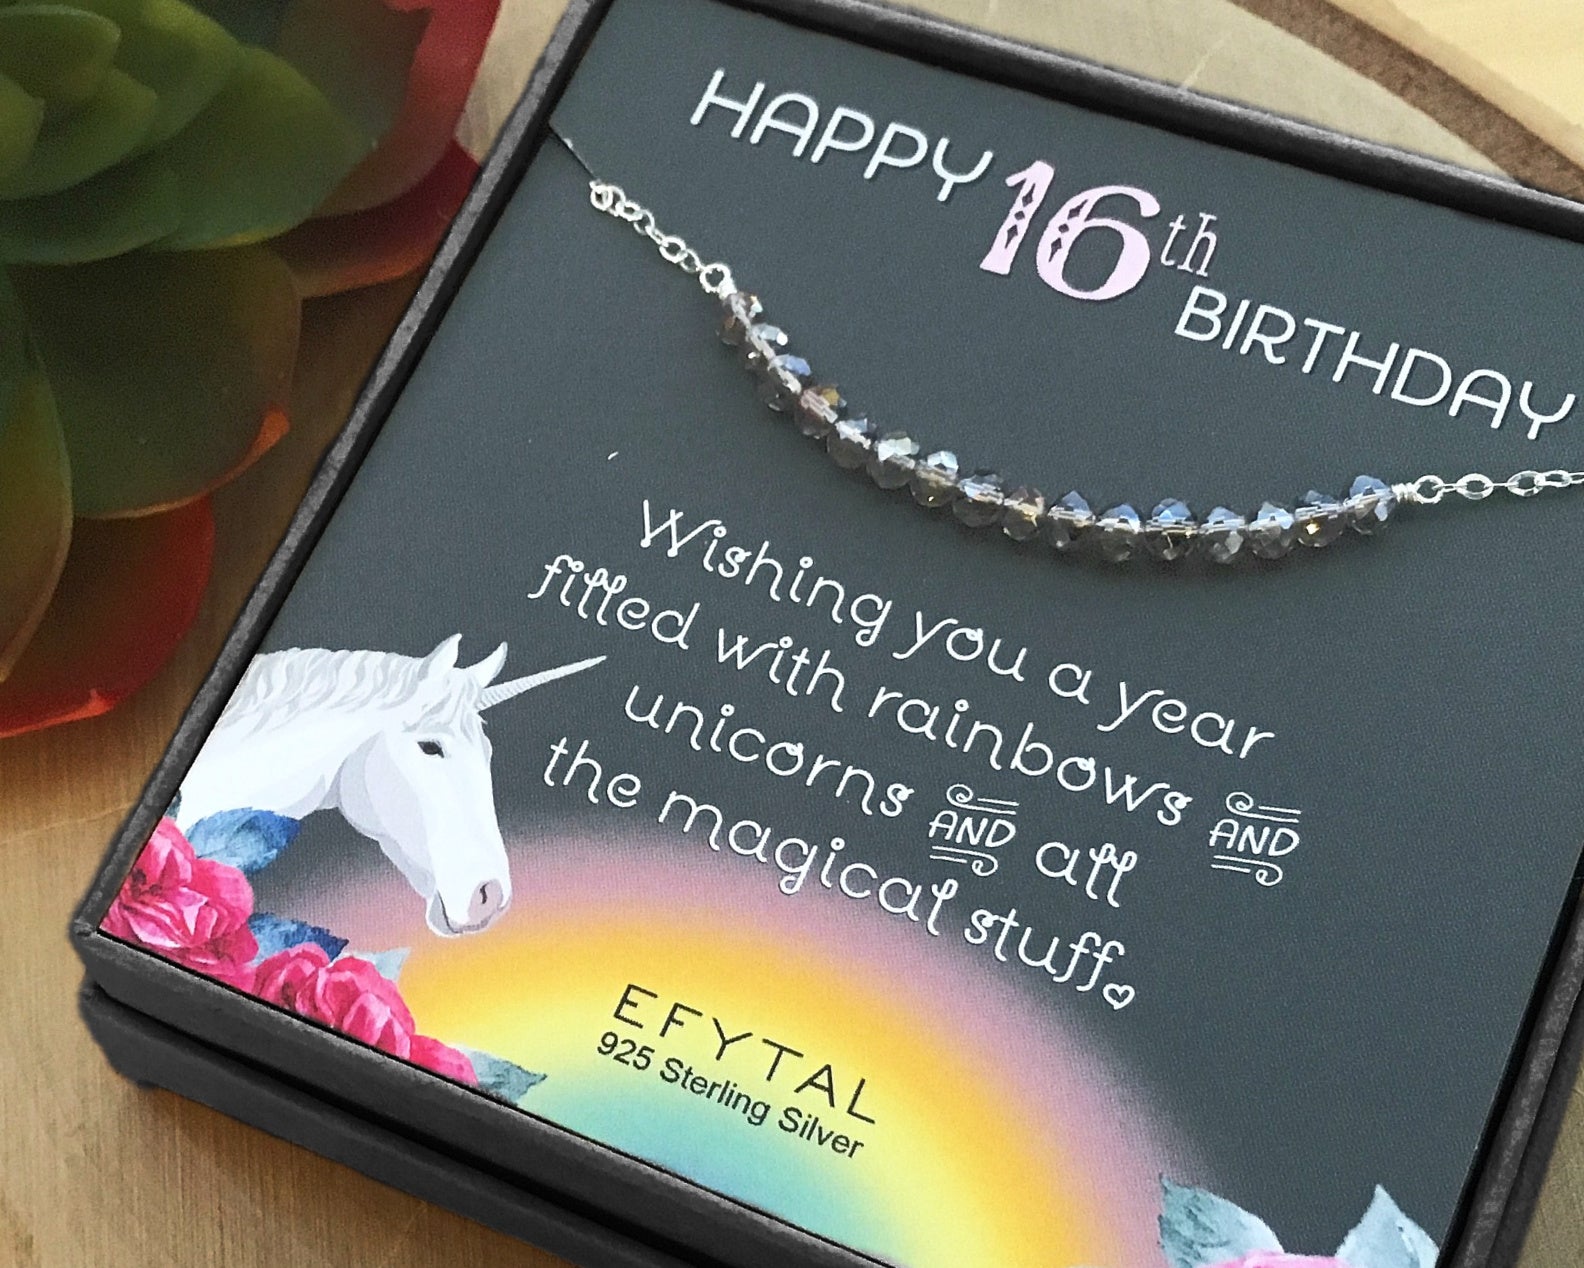  EFYTAL 12 Year Old Girl Gifts, 12 Beads Sterling Silver  Necklace, Gifts for 12 Year Old Girl, 12 Year Old Girl Gift Ideas, Birthday  Gifts for 12 Year Old Girls, Cool